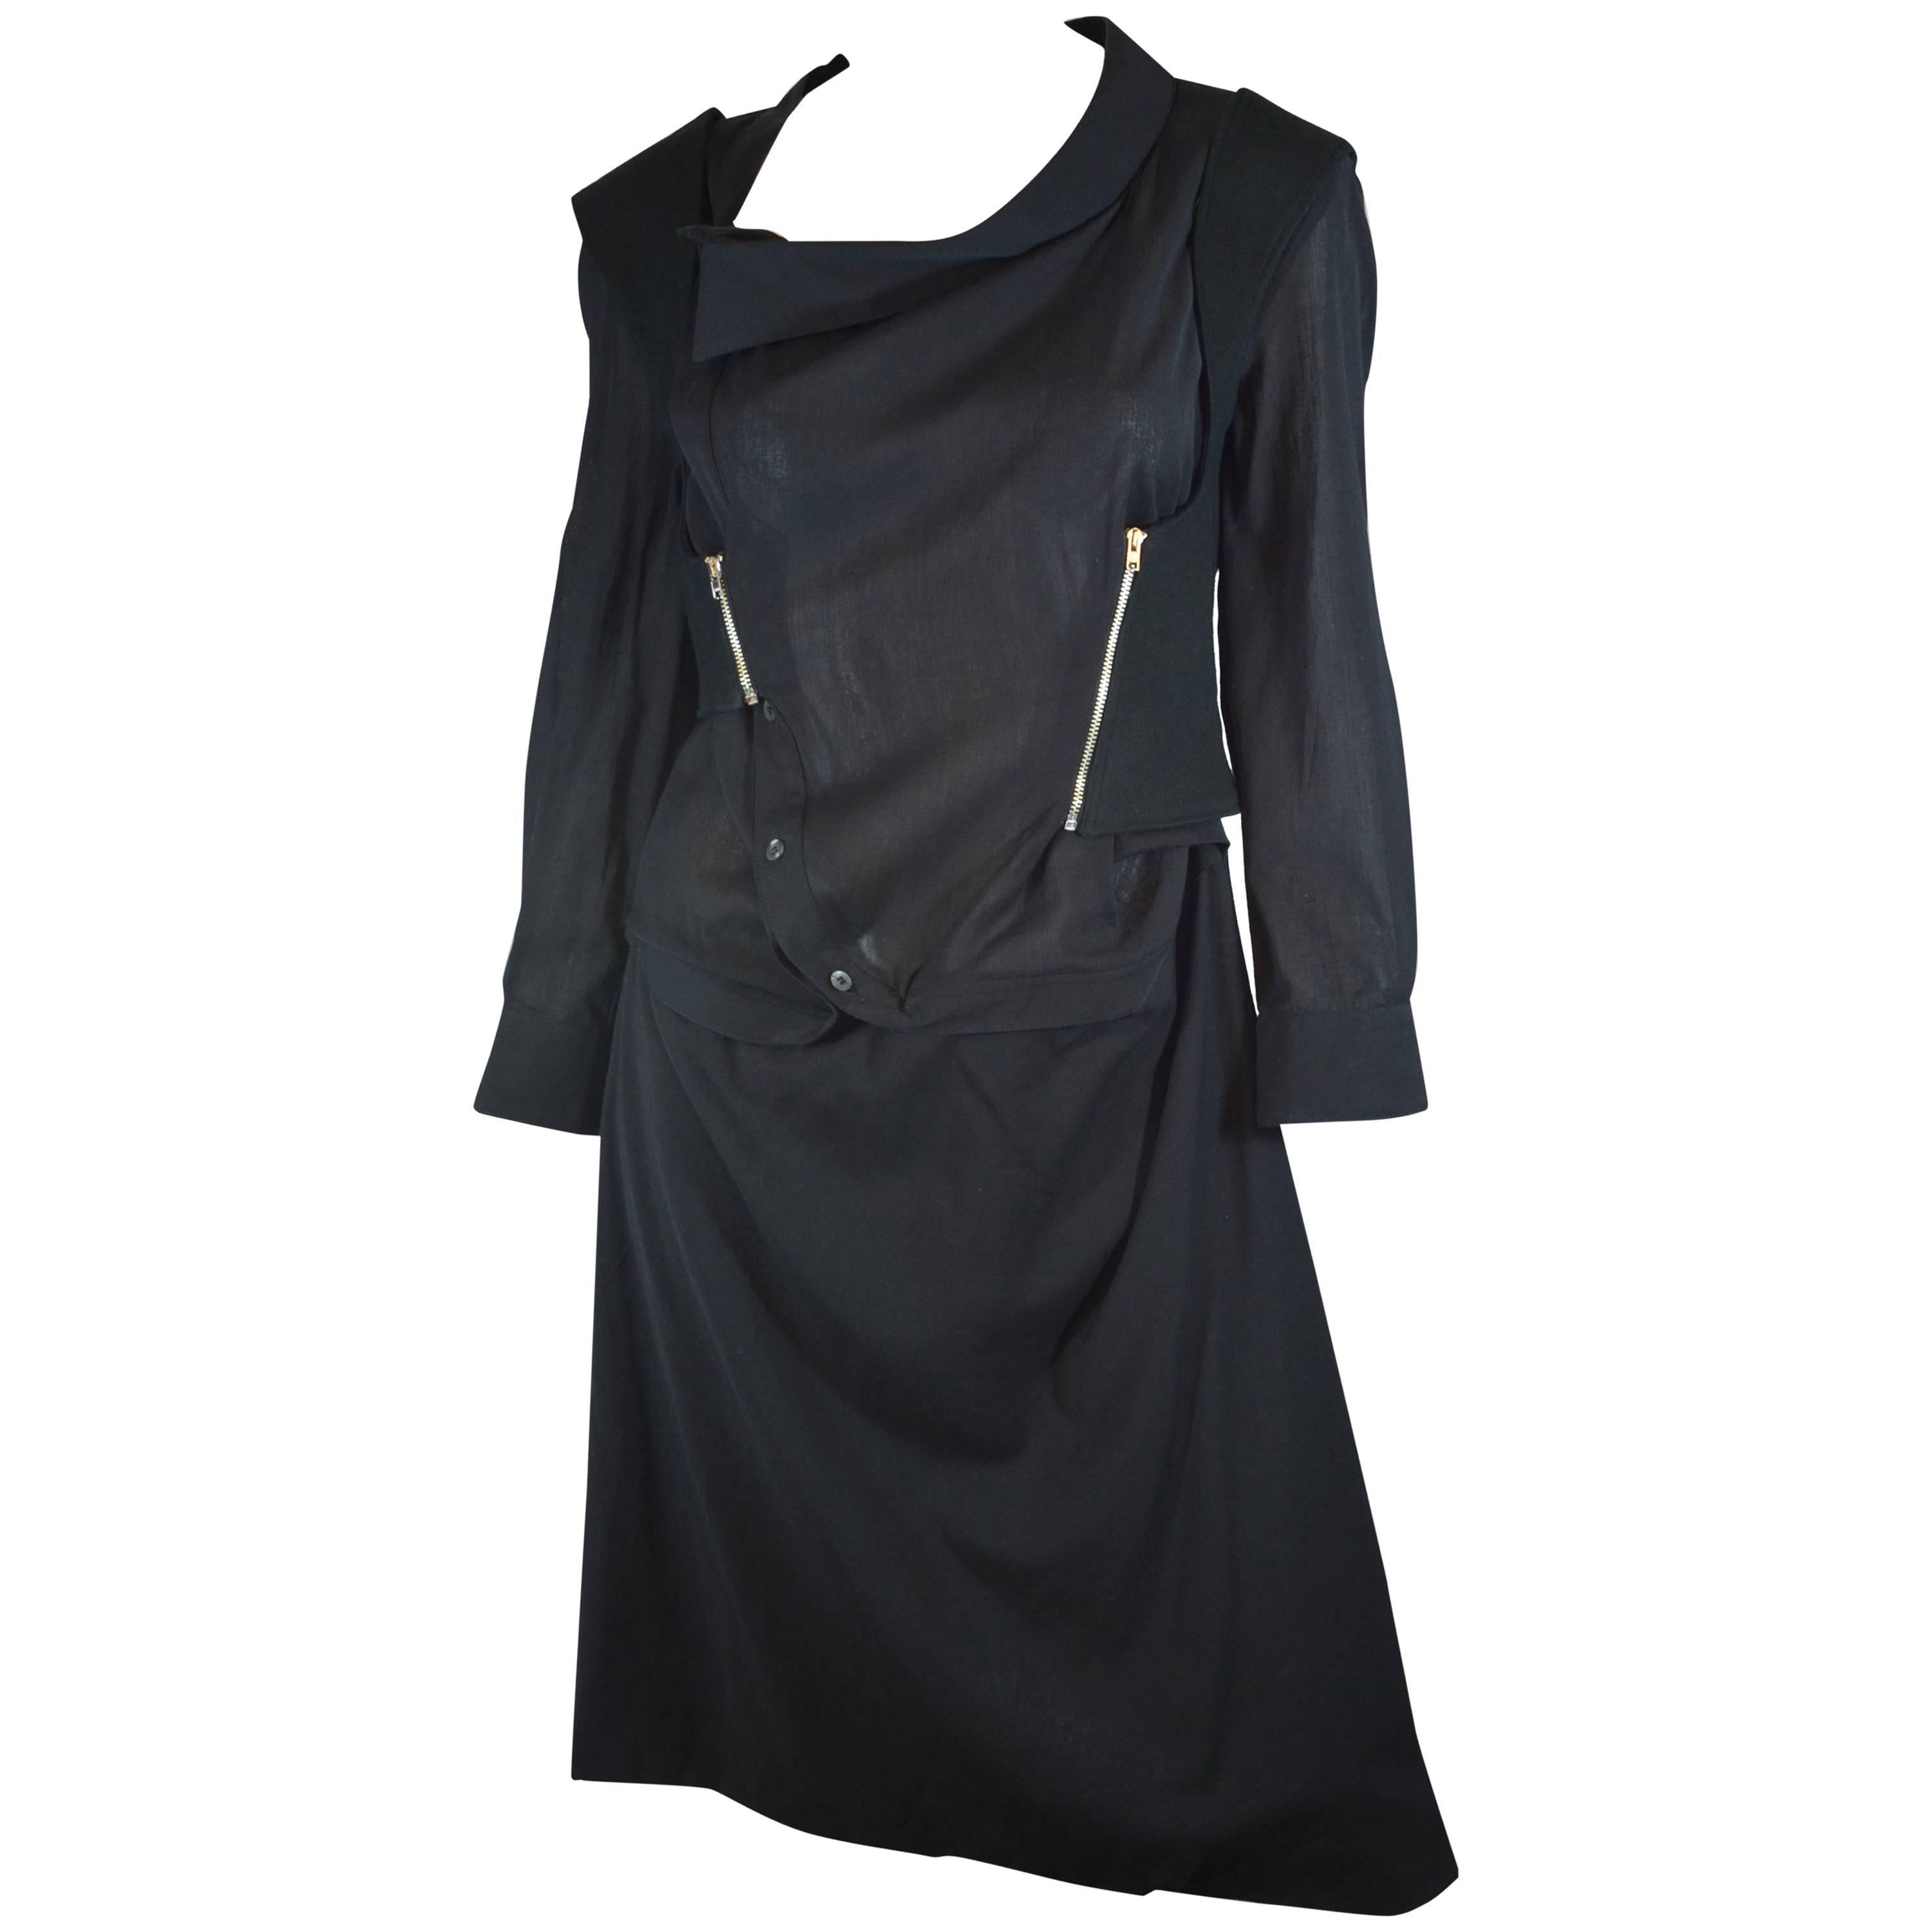 Hussein Chalayan Black Dress with Zippered Vest